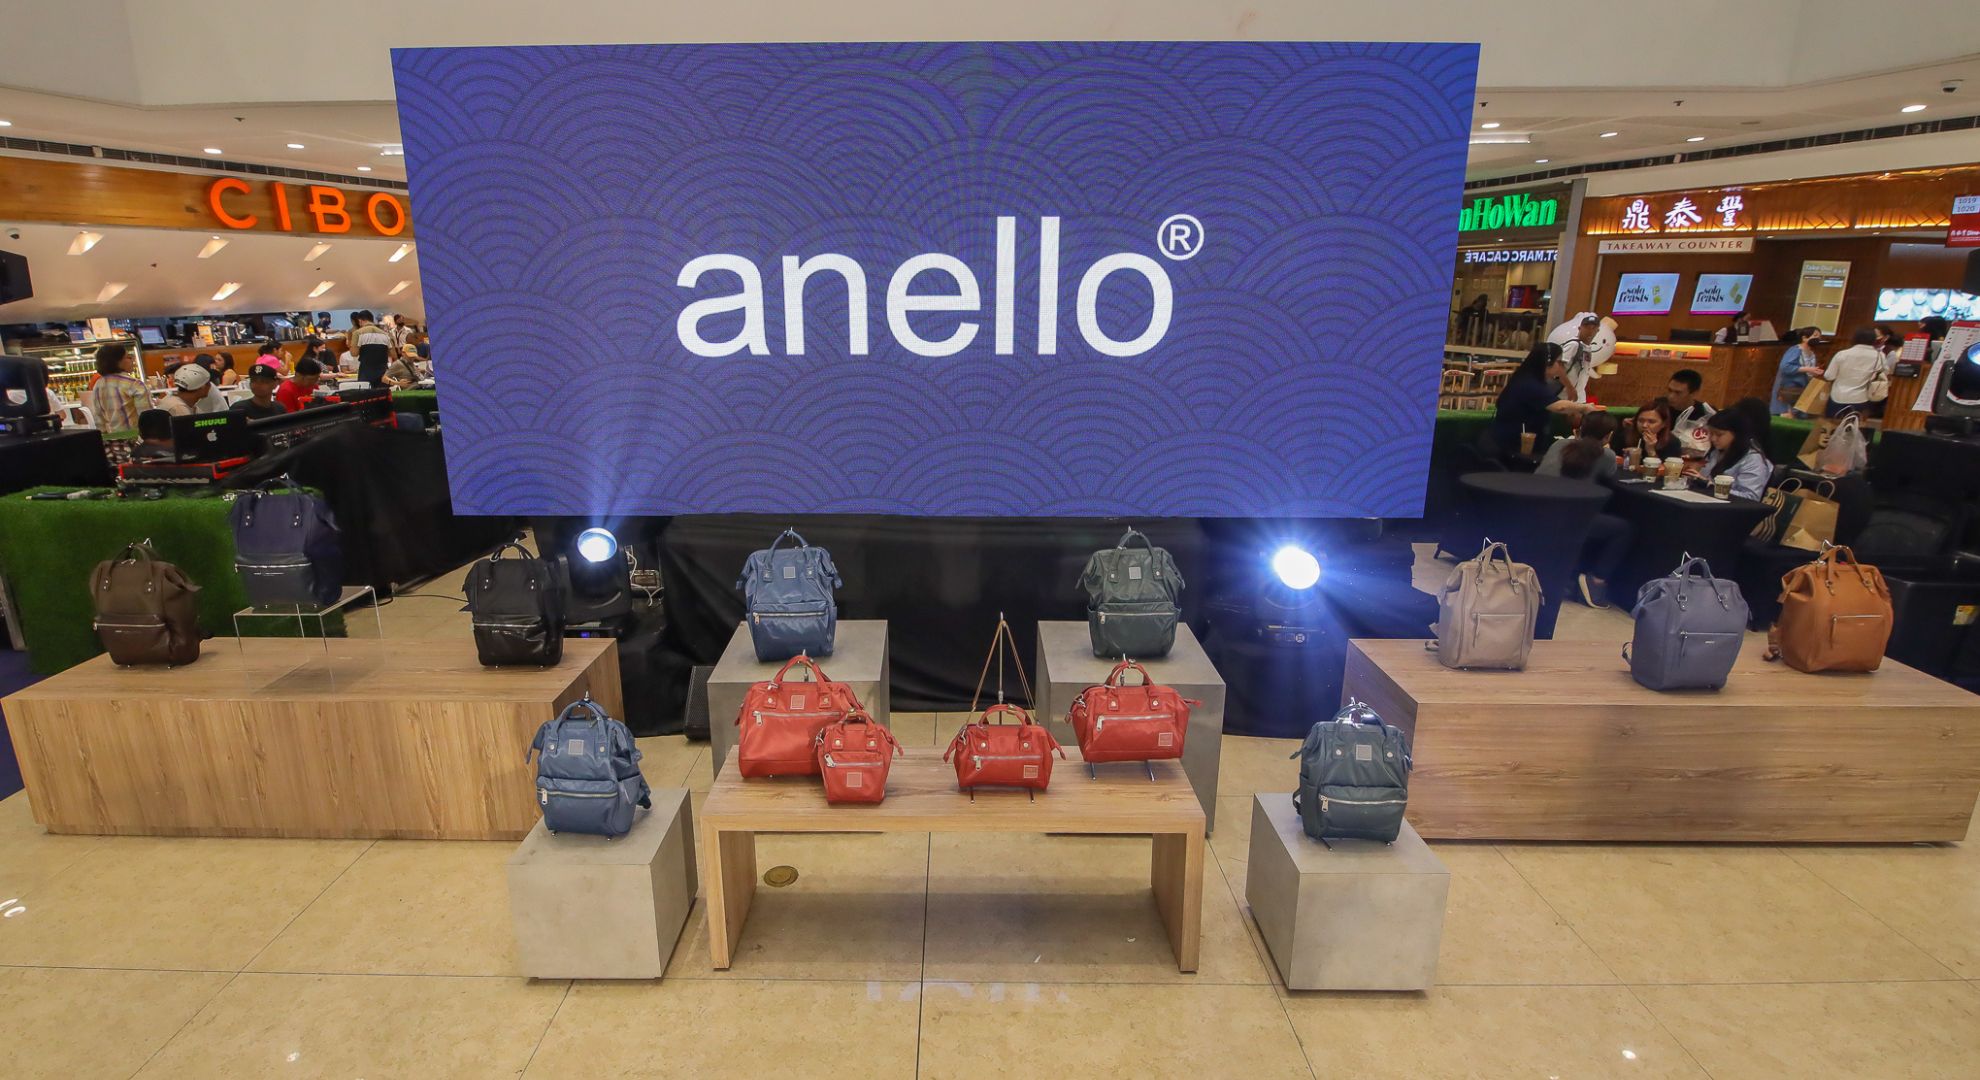 anello Philippines kicked off ‘all about anello’ 3-day event in SM Megamall